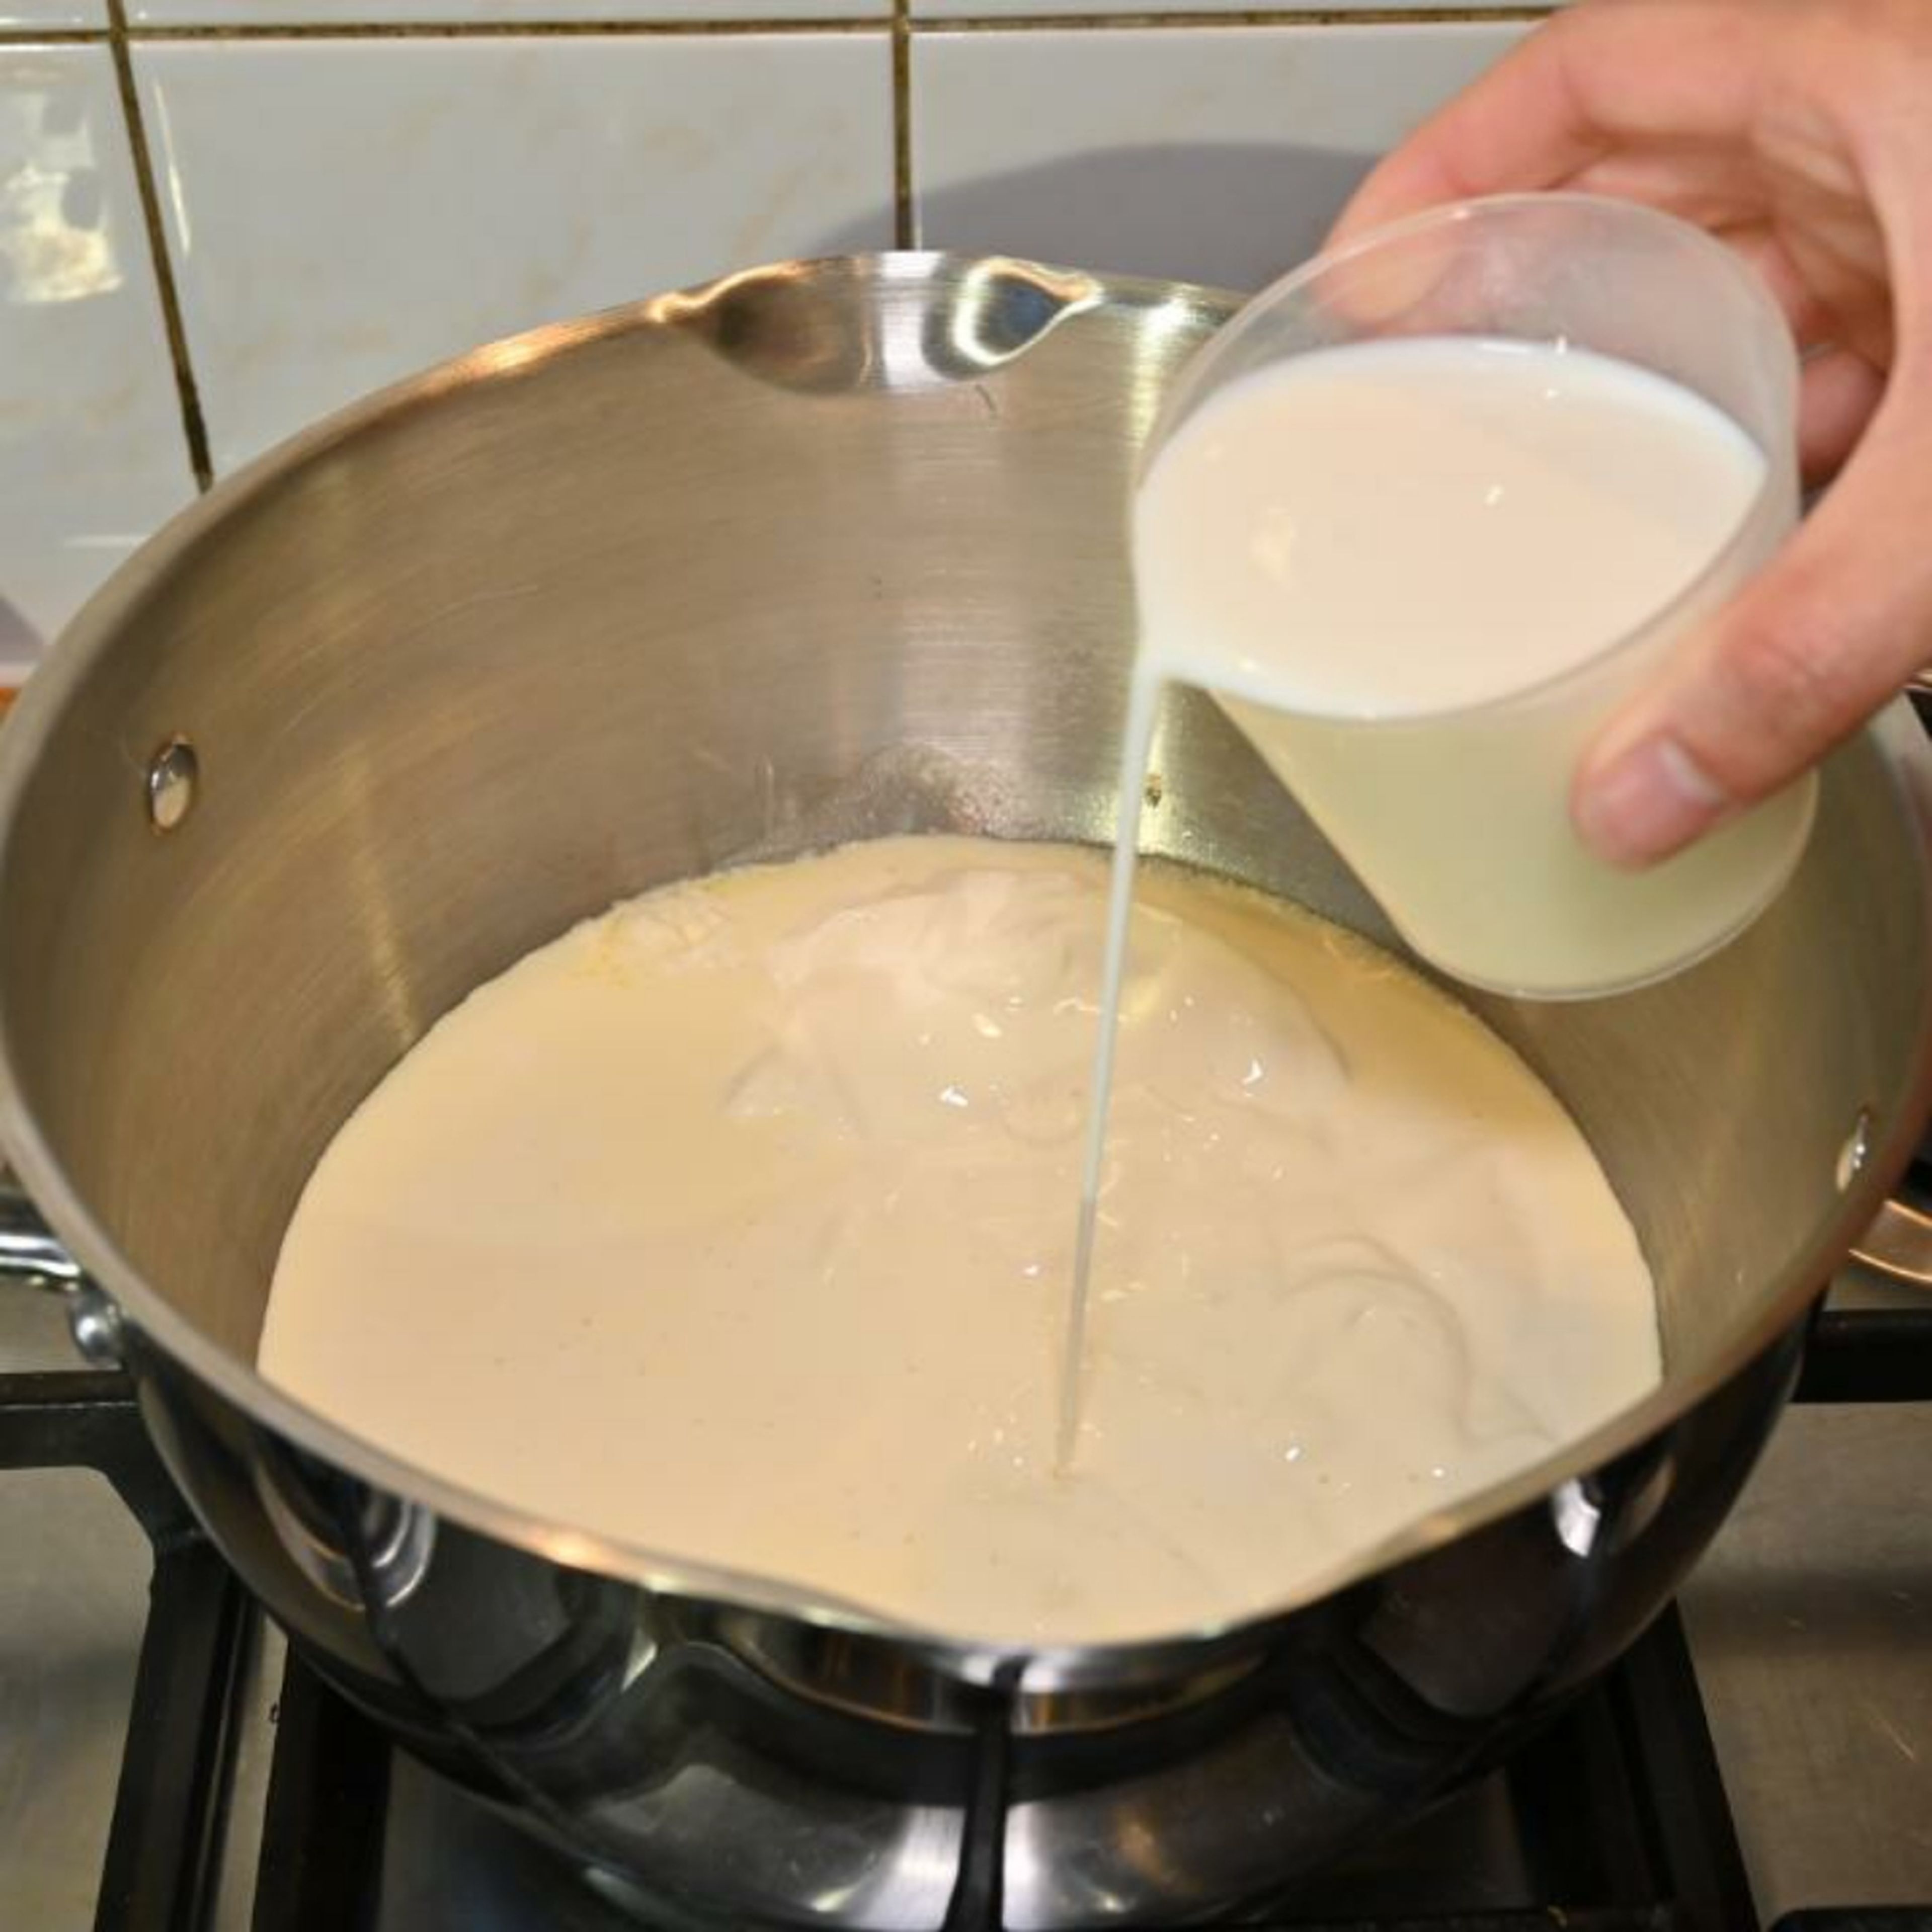 In a saucepan over low to medium heat, simmer the double cream, milk, and caster sugar. 
Keep stirring to dissolve the sugar and then add vanilla essence.